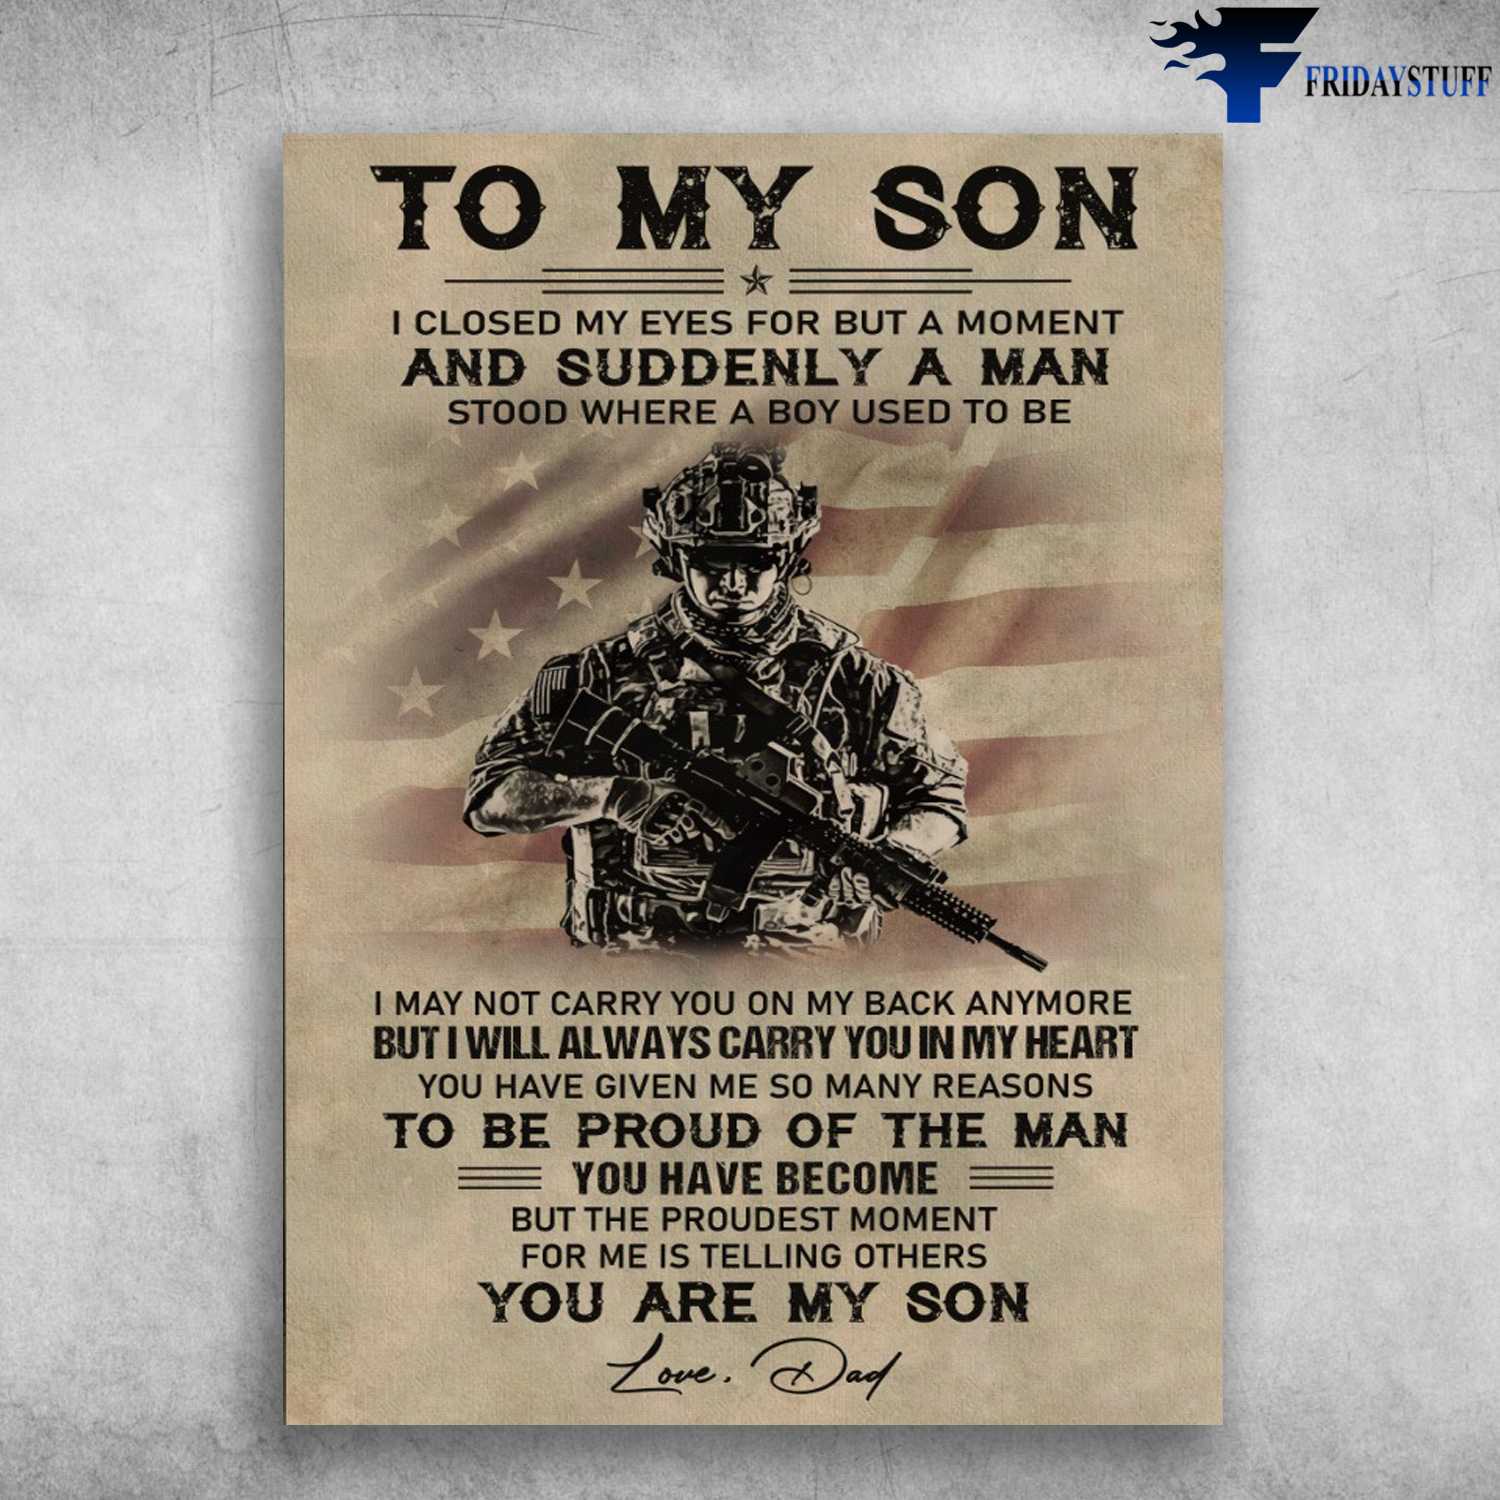 Soldier Poster, American Soldier, Dad And Son, I Closed My Eyes For But A Moment, And Suddenly A Man Stood, Where A Boy Used To Be, I May Not Carry You On My Back Anymore